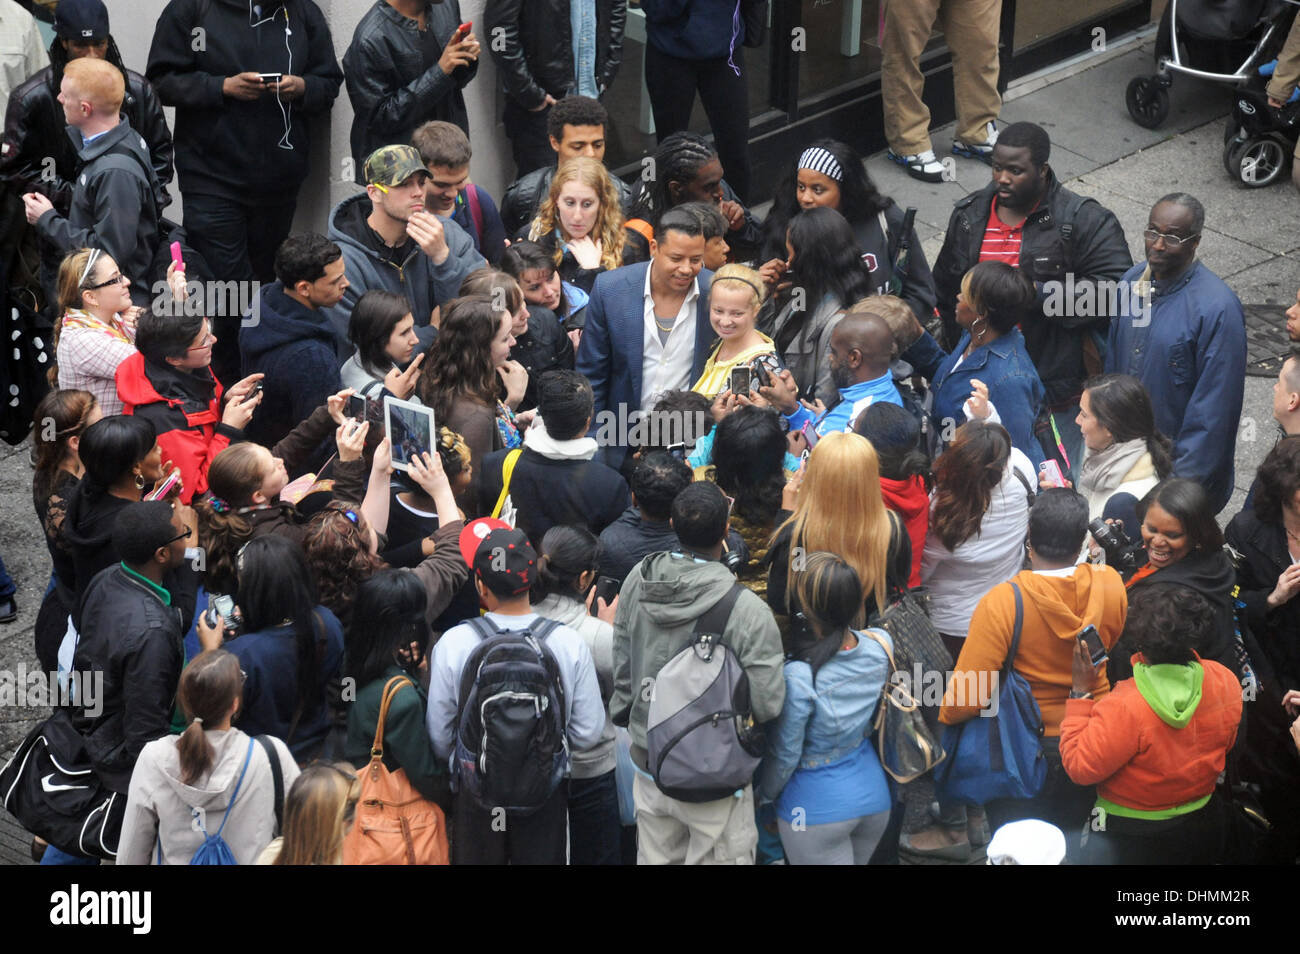 Terrence Howard is mobbed by fans   on the set of 'Dead Man Down' on Walnut Street. The film tells the story of a crime lord's right-hand man who is seduced by one of his boss's victims, a woman seeking retribution.  Philadelphia, Pennsylvania - 02.05.12 Stock Photo